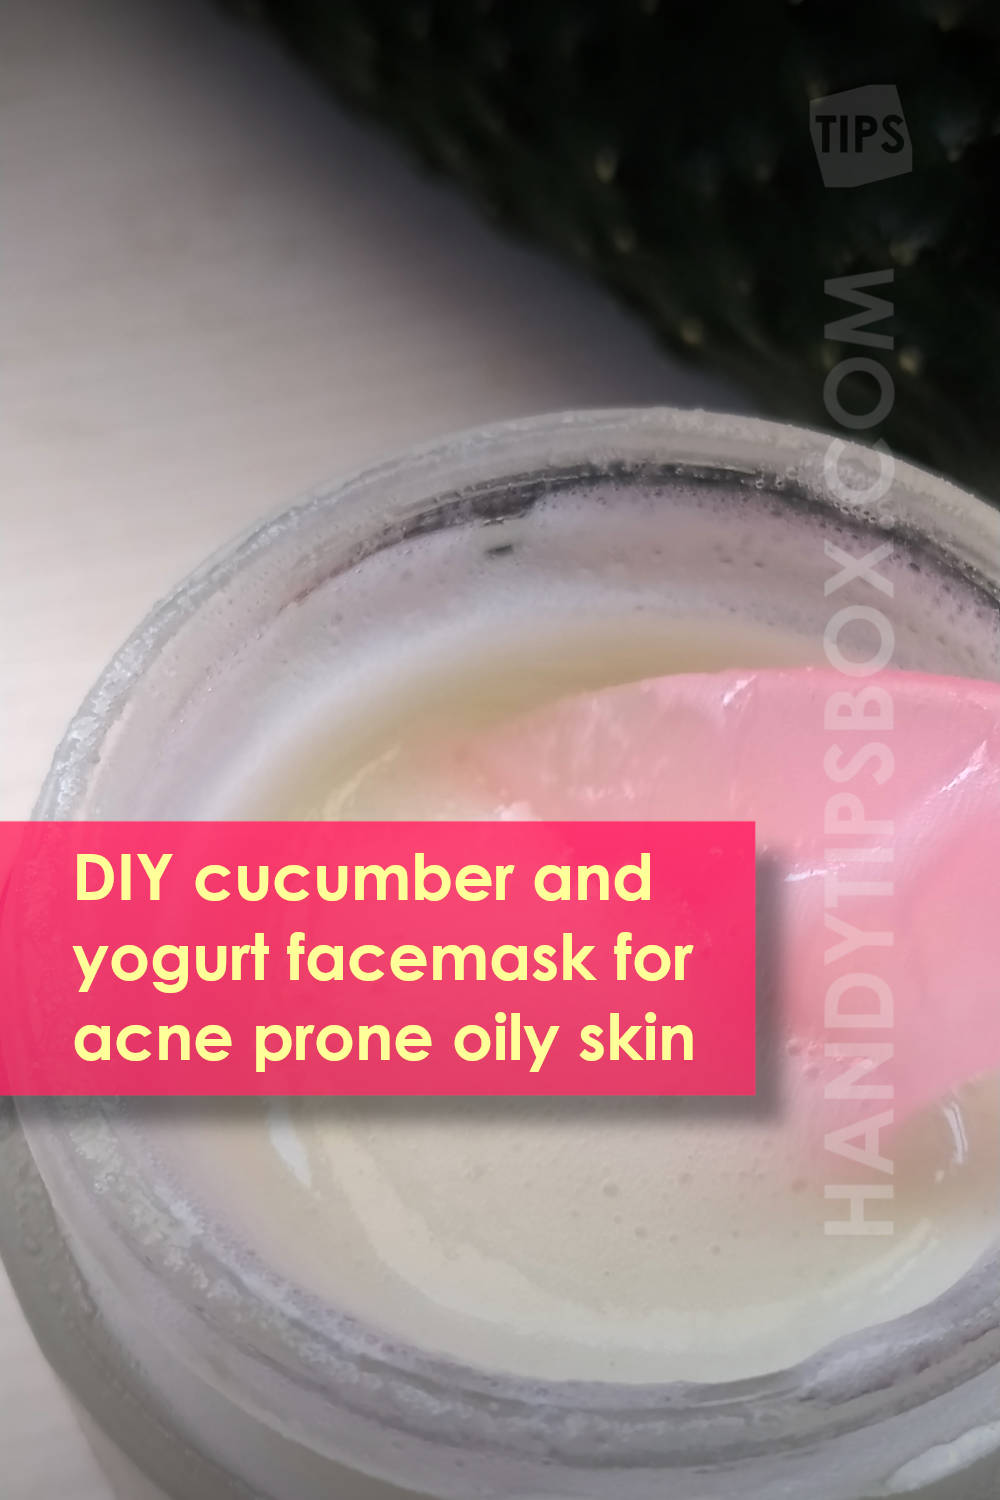 Homemade cucumber and yogurt face mask, ready-to-use, vertical image